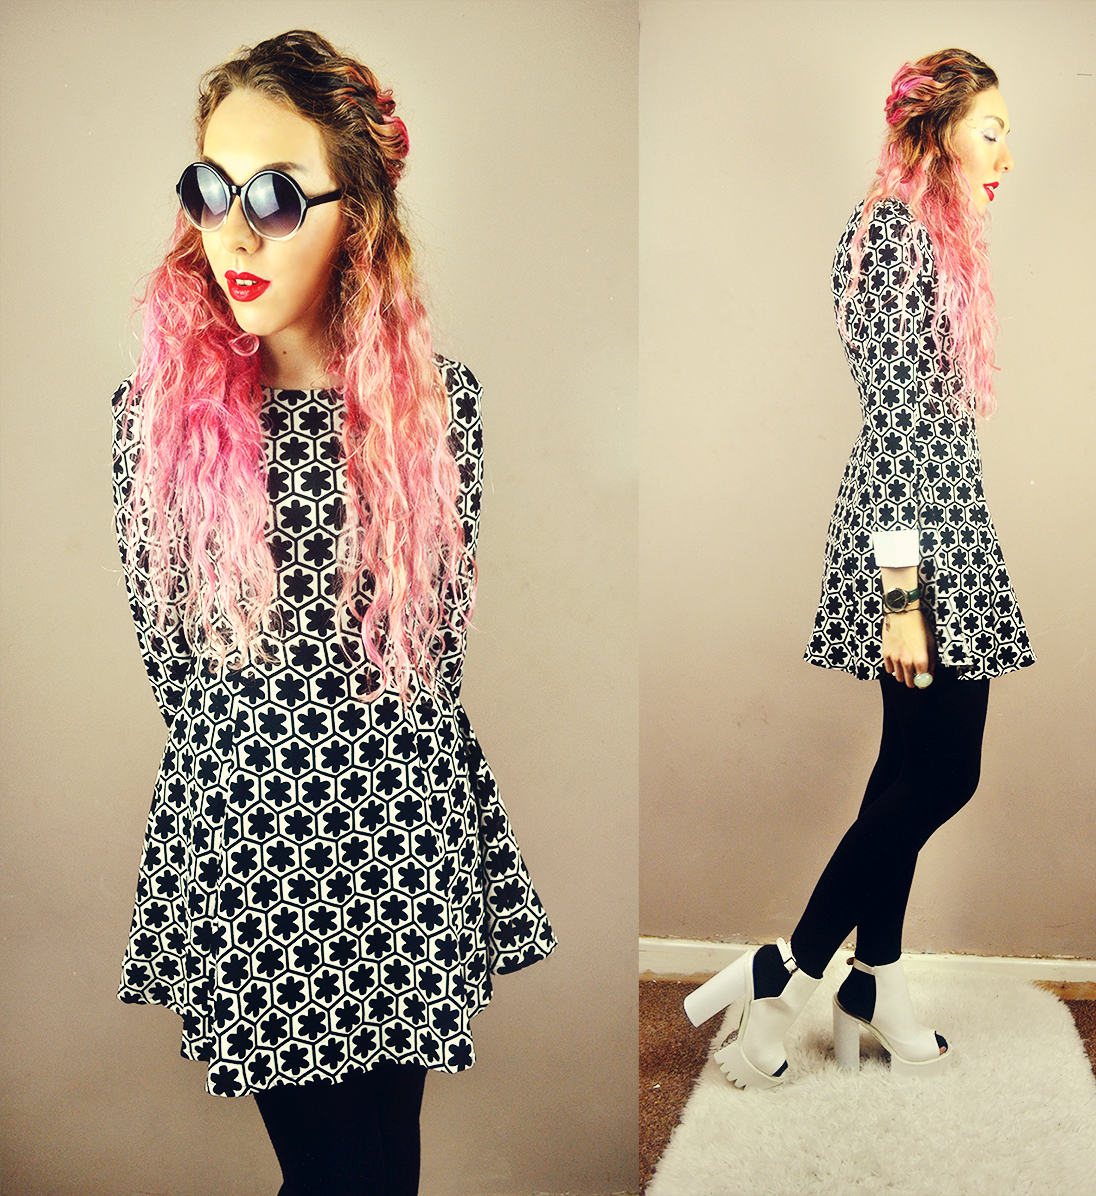 Stephi LaReine, Hidden Fashion 60s dress, spylovebuy cleated white heels, urban outfitters round ombre sunglasses, item m6 tights, uk fashion blogger, bloglovin, fbloggers, pastel